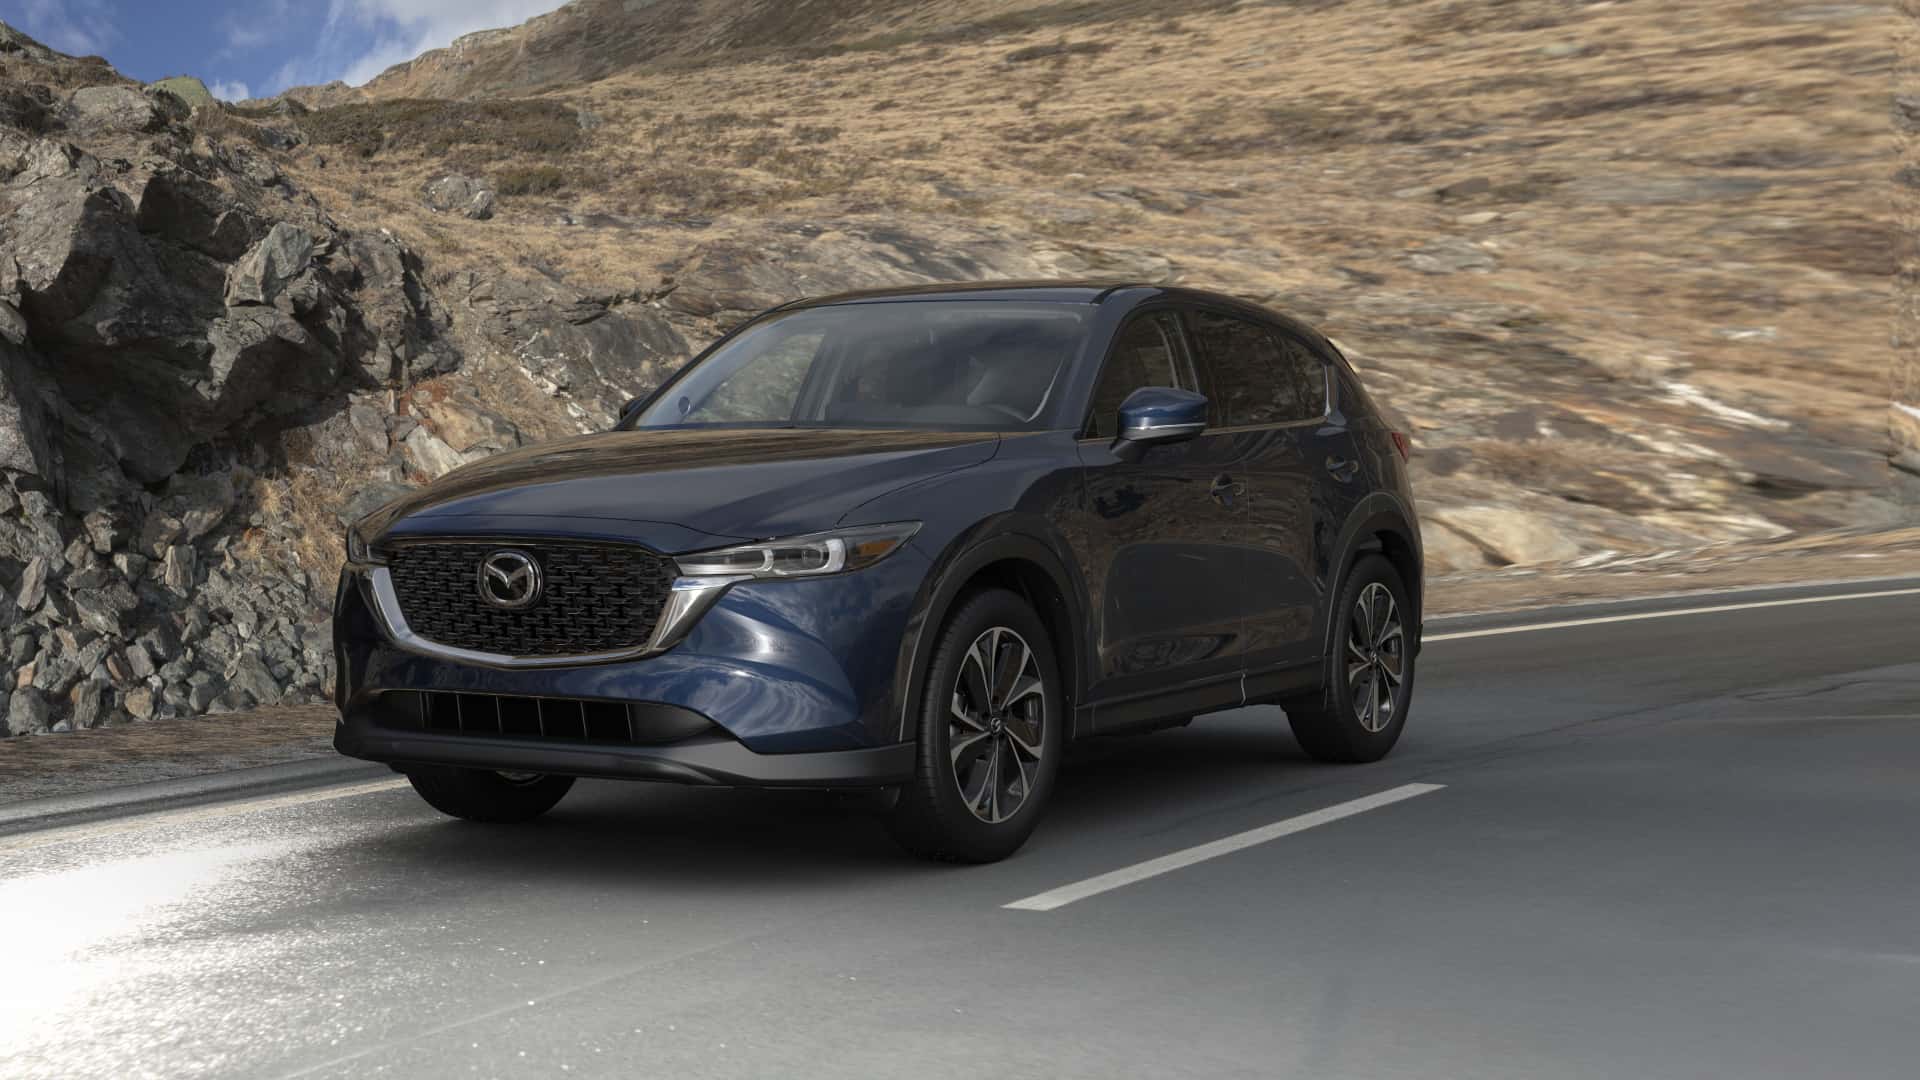 2023 Mazda CX-5 2.5 S Premium Deep Crystal Blue Mica | Bommarito Mazda St. Peters in St. Peters MO